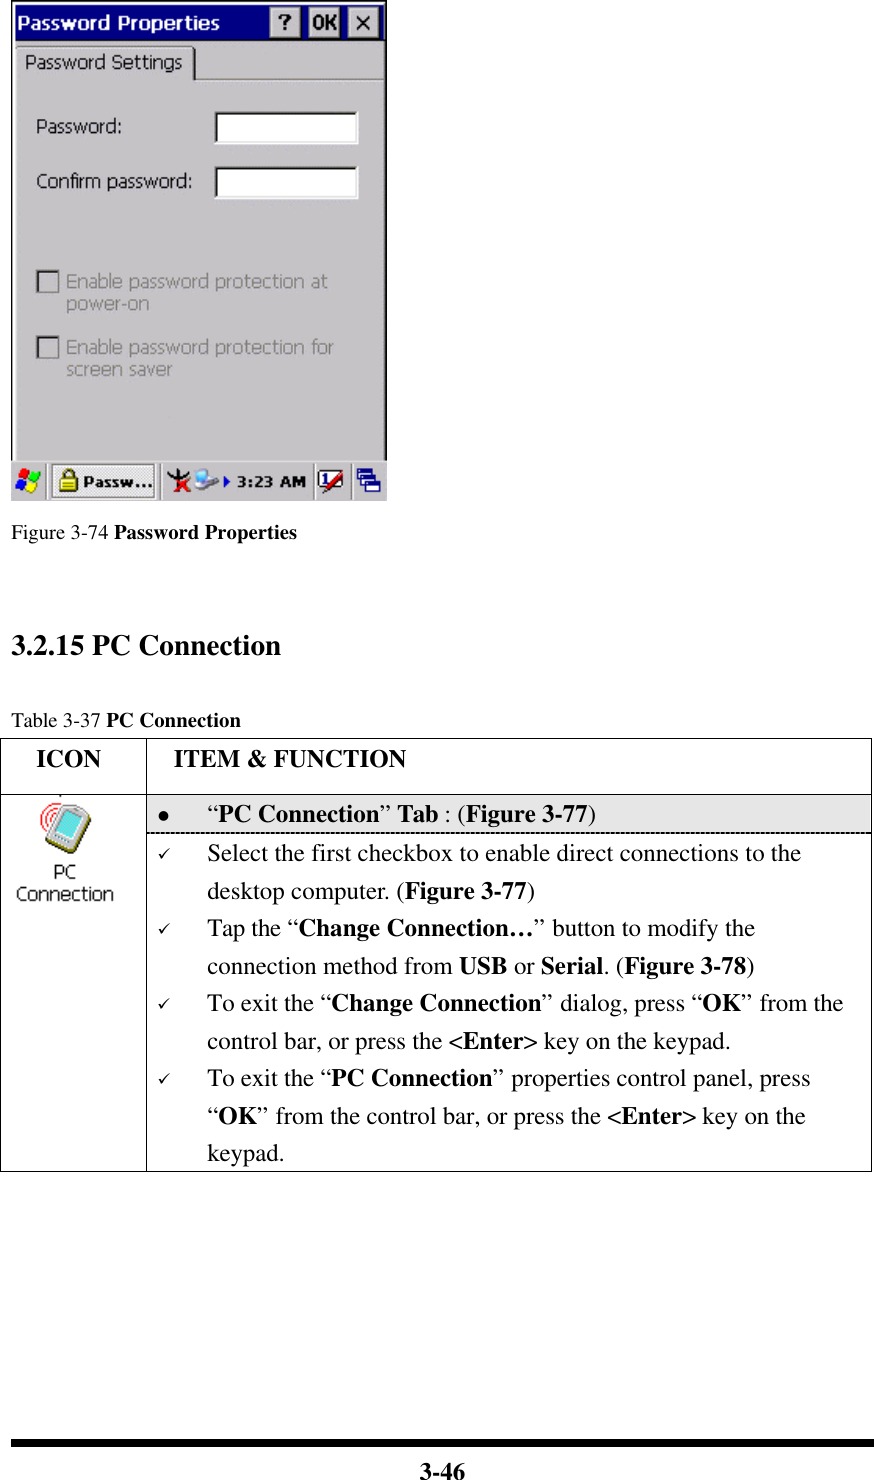  3-46    Figure 3-74 Password Properties   3.2.15 PC Connection    Table 3-37 PC Connection   ICON  ITEM &amp; FUNCTION l “PC Connection” Tab : (Figure 3-77)  ü Select the first checkbox to enable direct connections to the desktop computer. (Figure 3-77) ü Tap the “Change Connection… ” button to modify the connection method from USB or Serial. (Figure 3-78) ü To exit the “Change Connection” dialog, press “OK” from the control bar, or press the &lt;Enter&gt; key on the keypad. ü To exit the “PC Connection” properties control panel, press “OK” from the control bar, or press the &lt;Enter&gt; key on the keypad.  